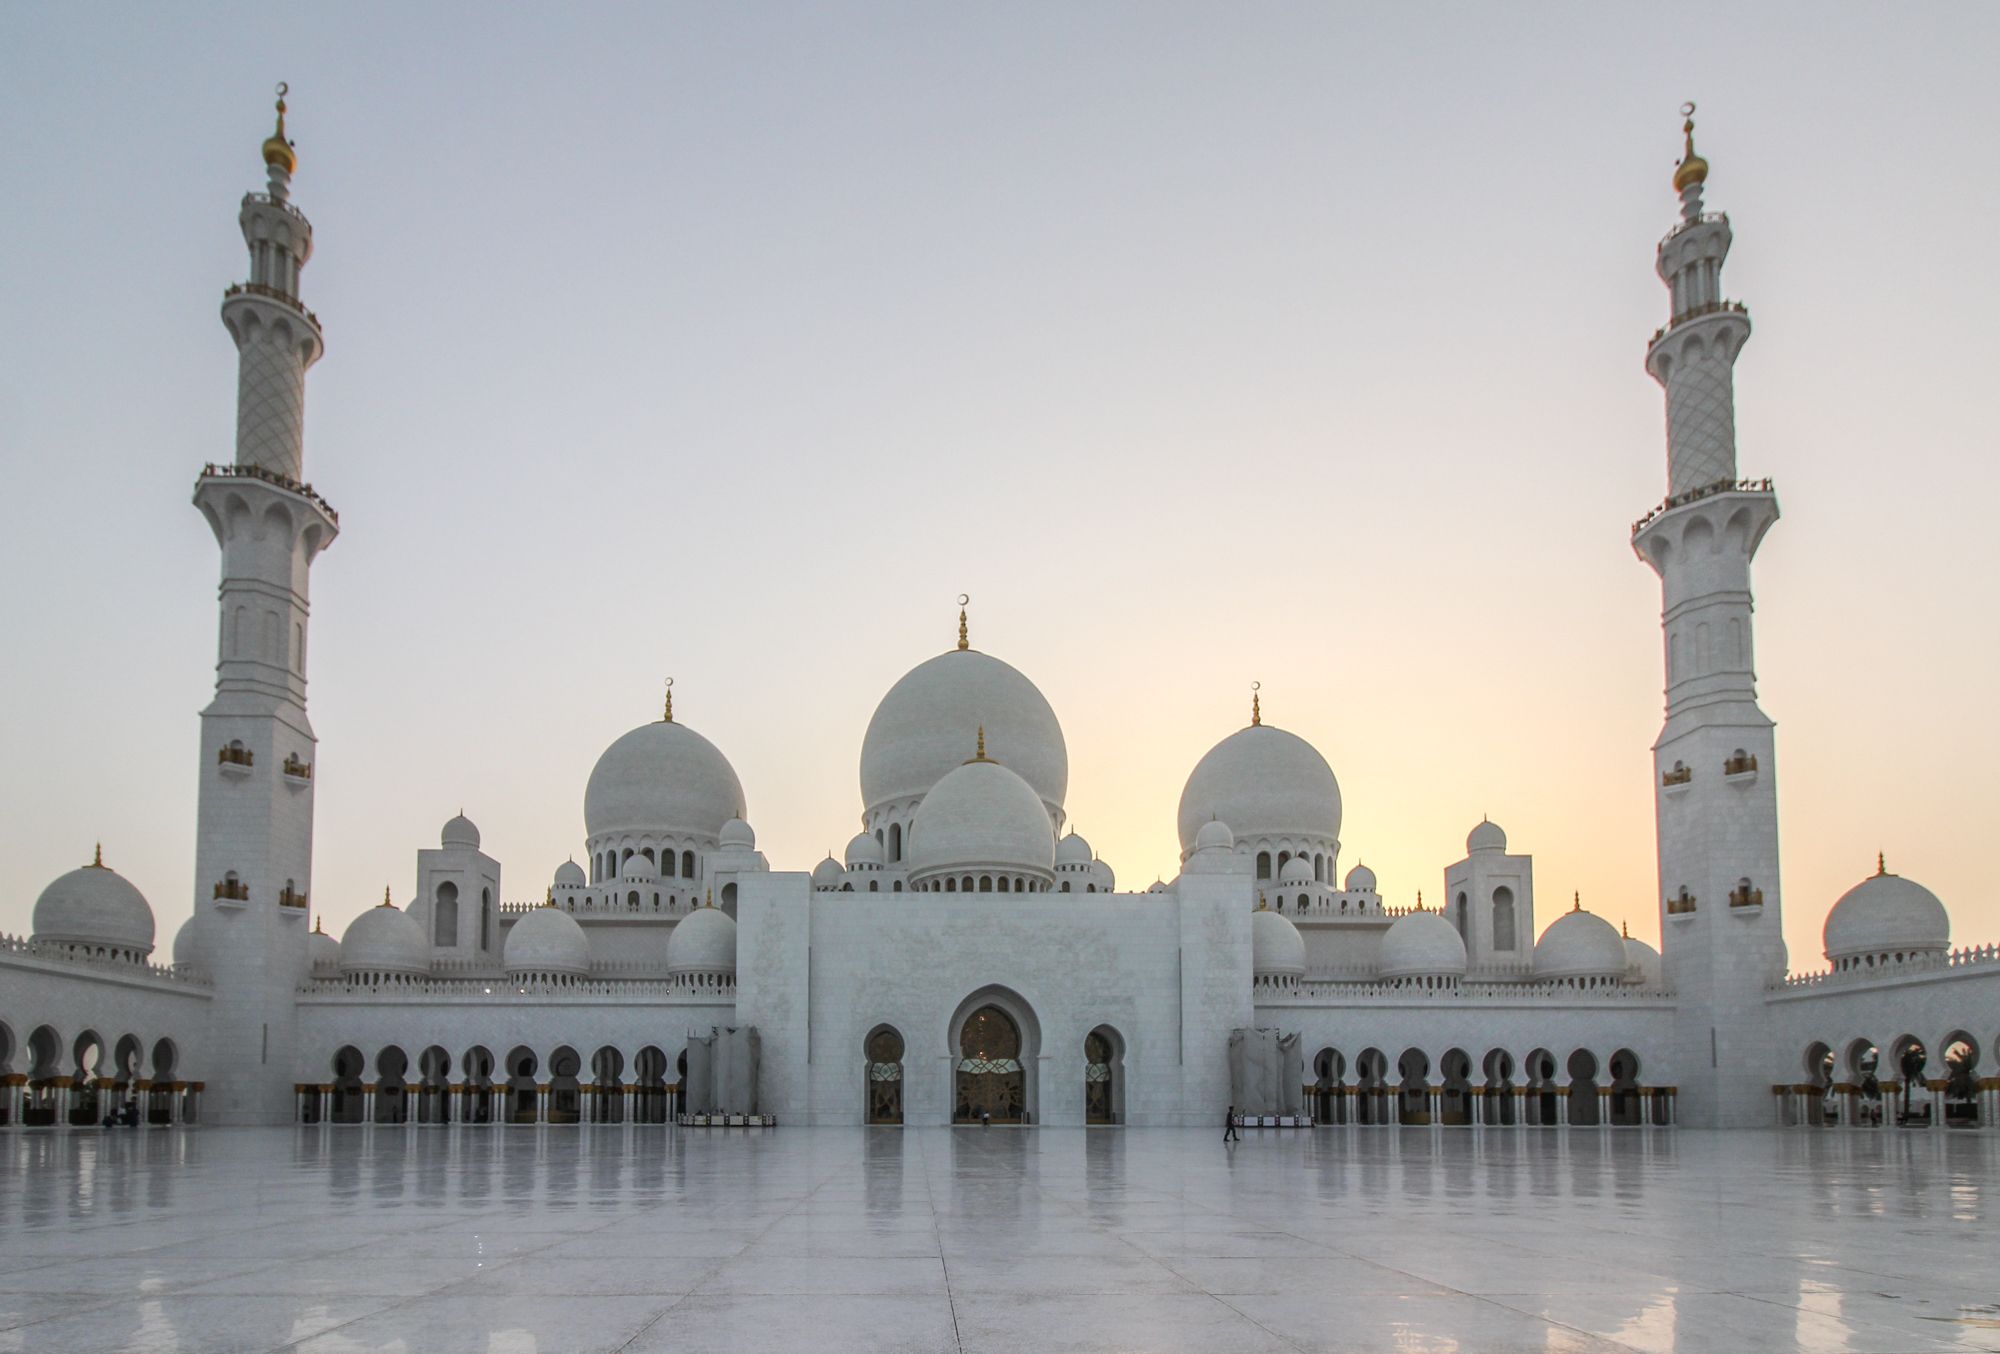 grand-mosque-frontal-after-sunset.jpg